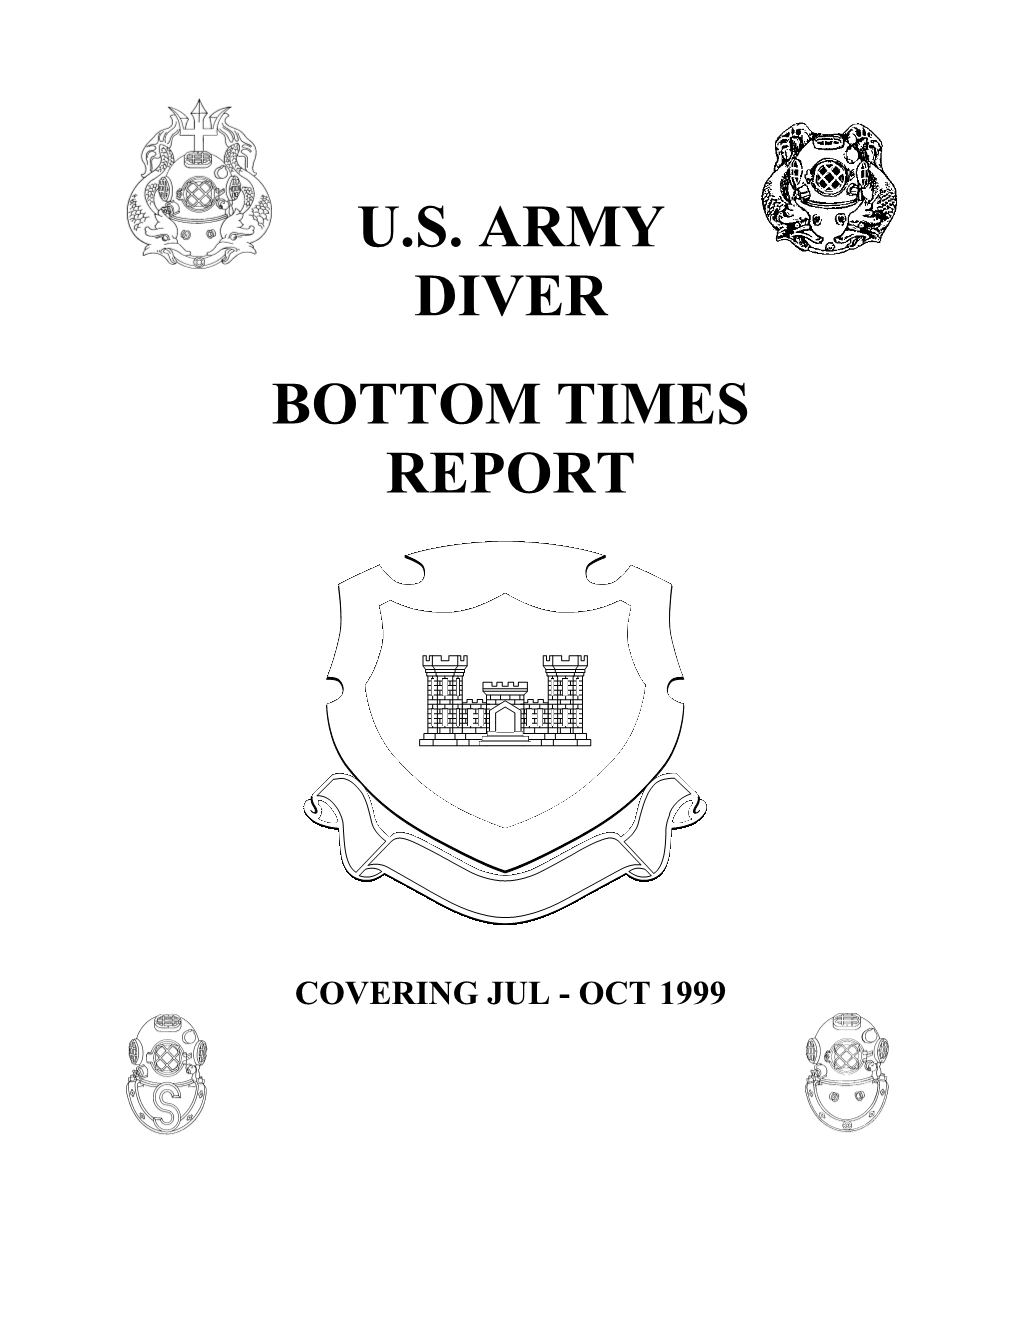 U.S. Army Diver Bottom Times Report